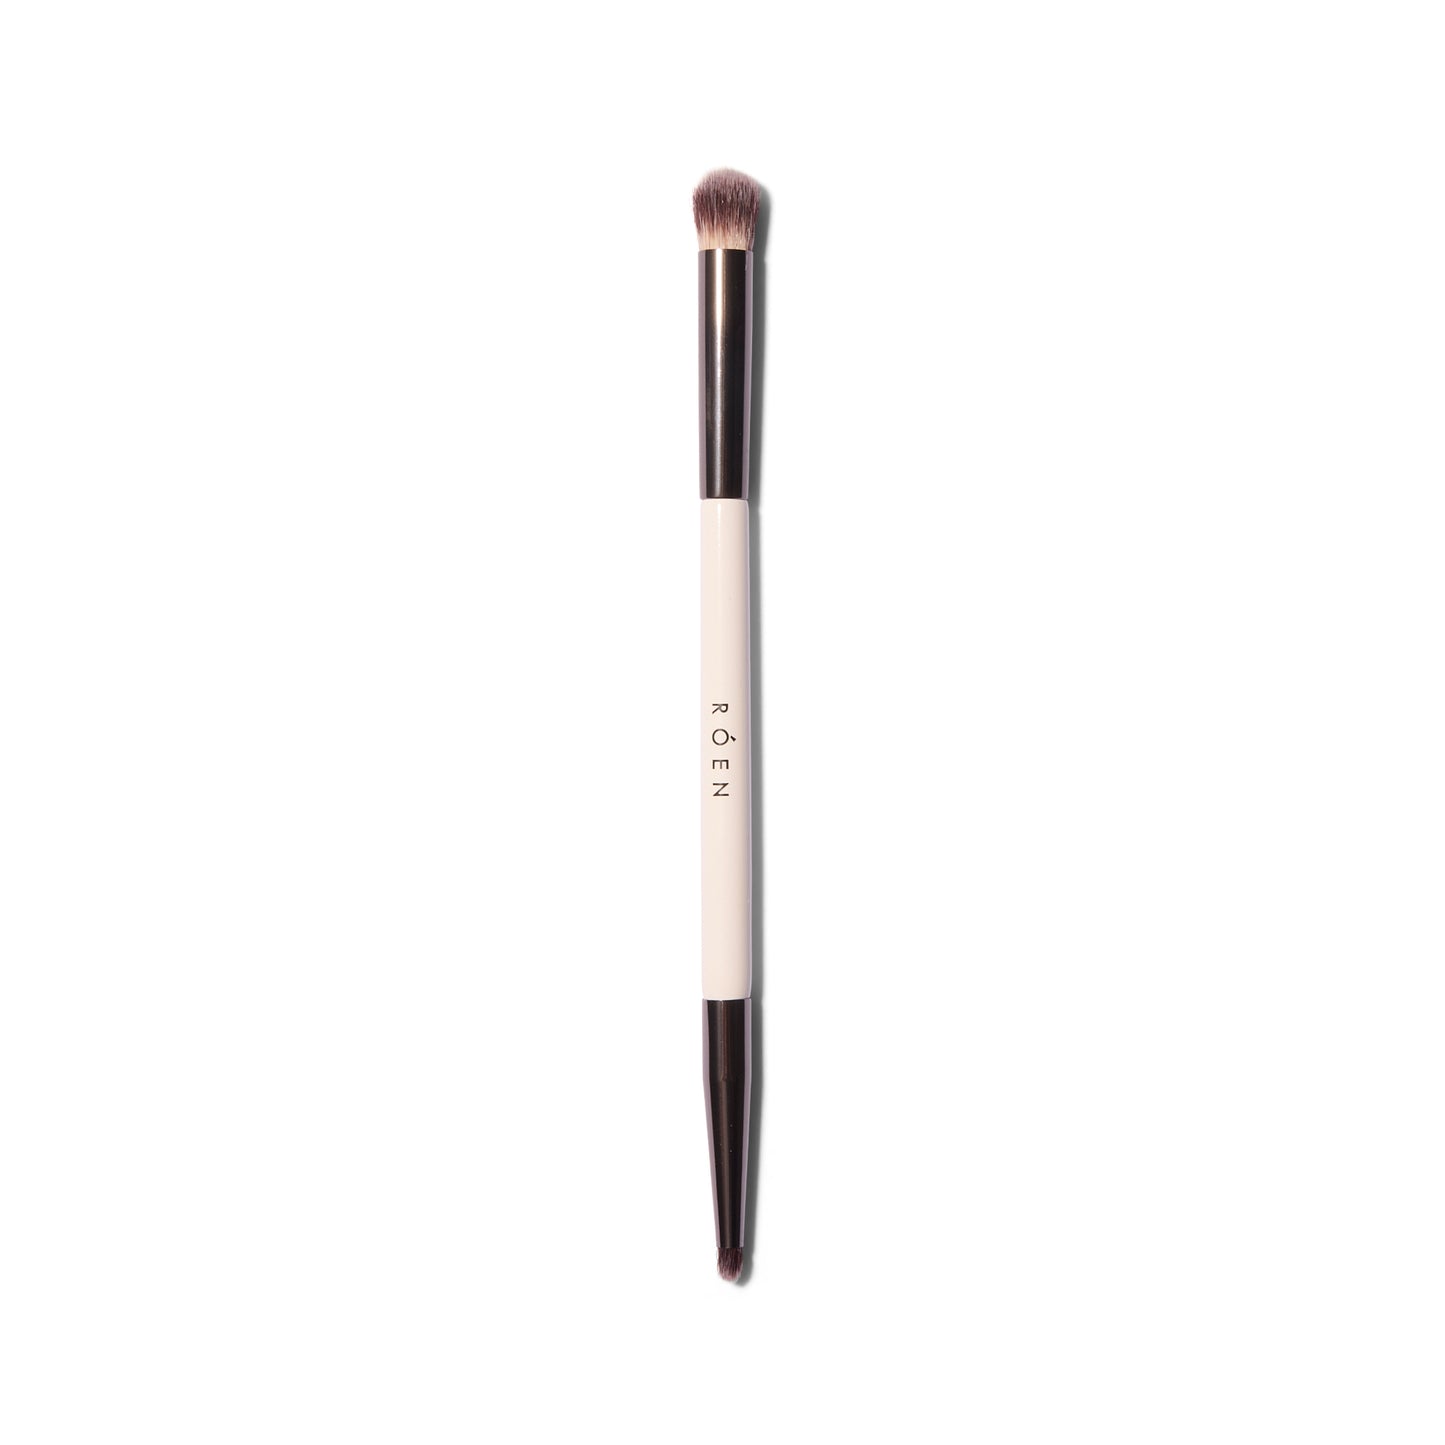 The Roen Everything Eye dual ended eyeshadow brush. One side has a smaller tapered tip and the other is fluffier and dome shaped.